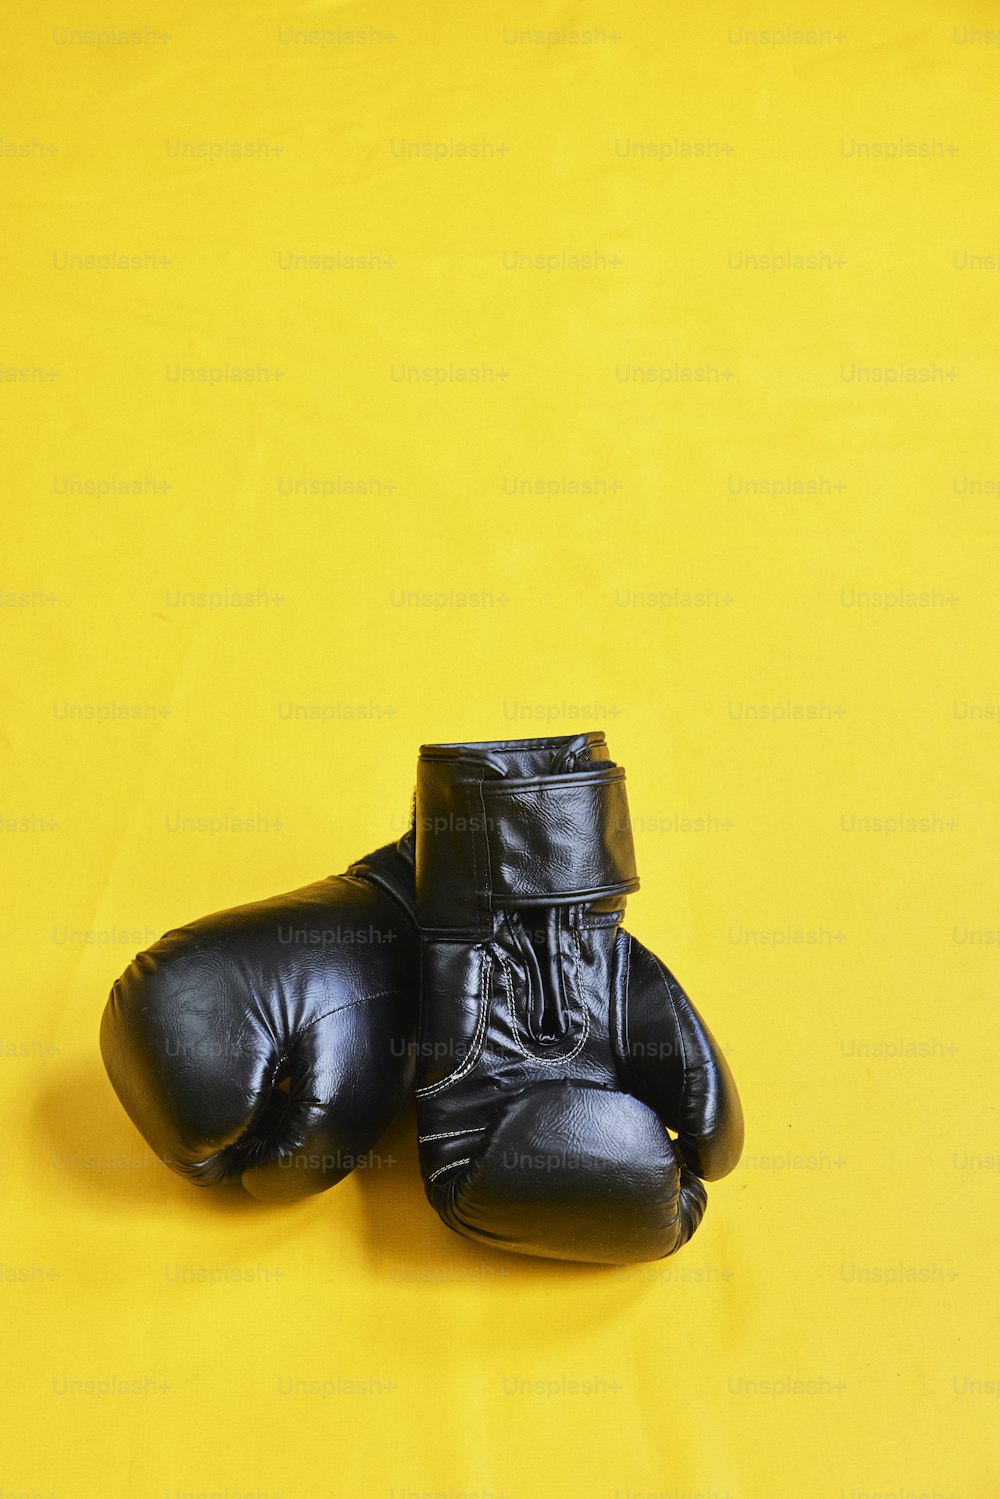 a pair of black boxing gloves on a yellow background